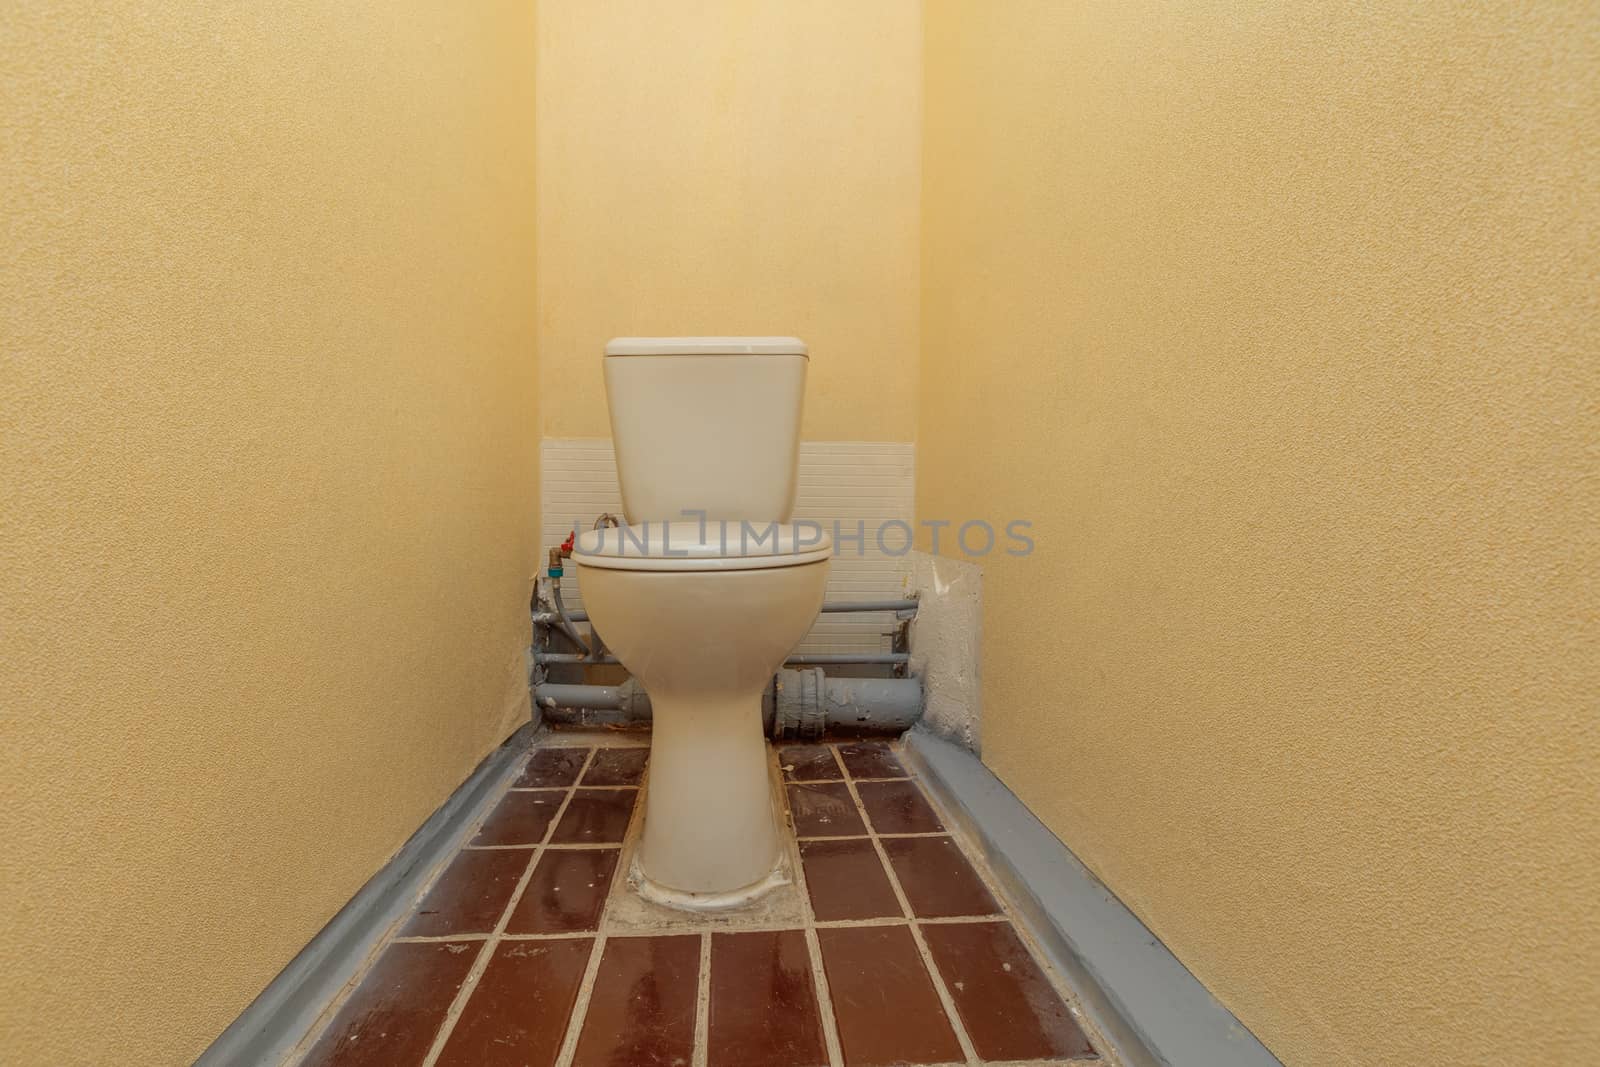 Toilet bowl in the toilet room. Restroom with brown wallpaper decoration